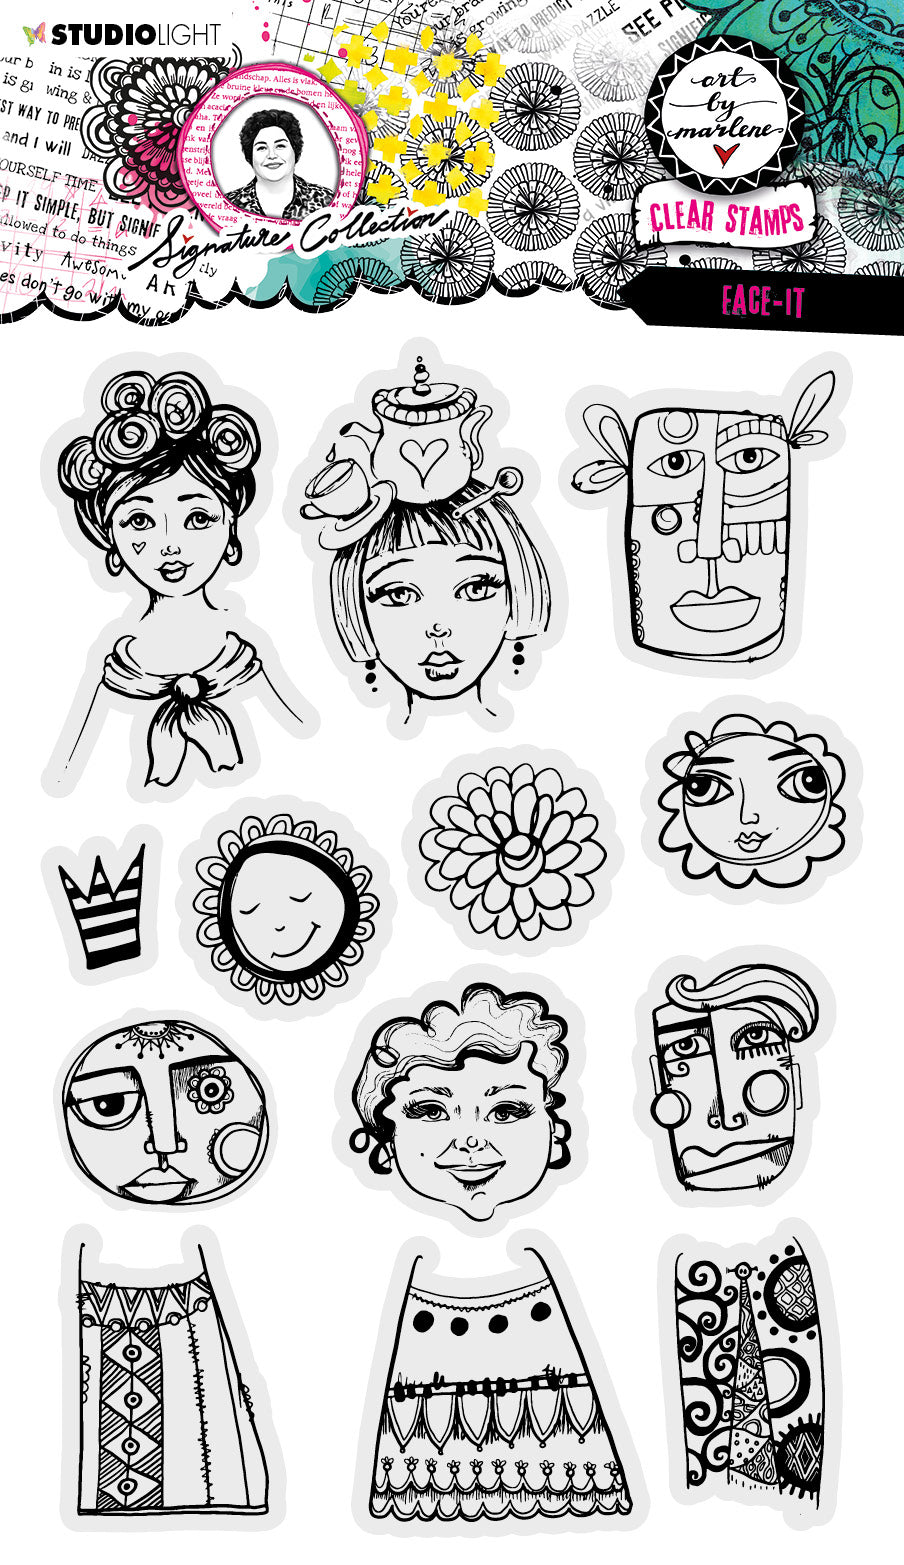 ABM Clear Stamp Face-It Signature Collection 148x210x3mm 13 PC nr.506